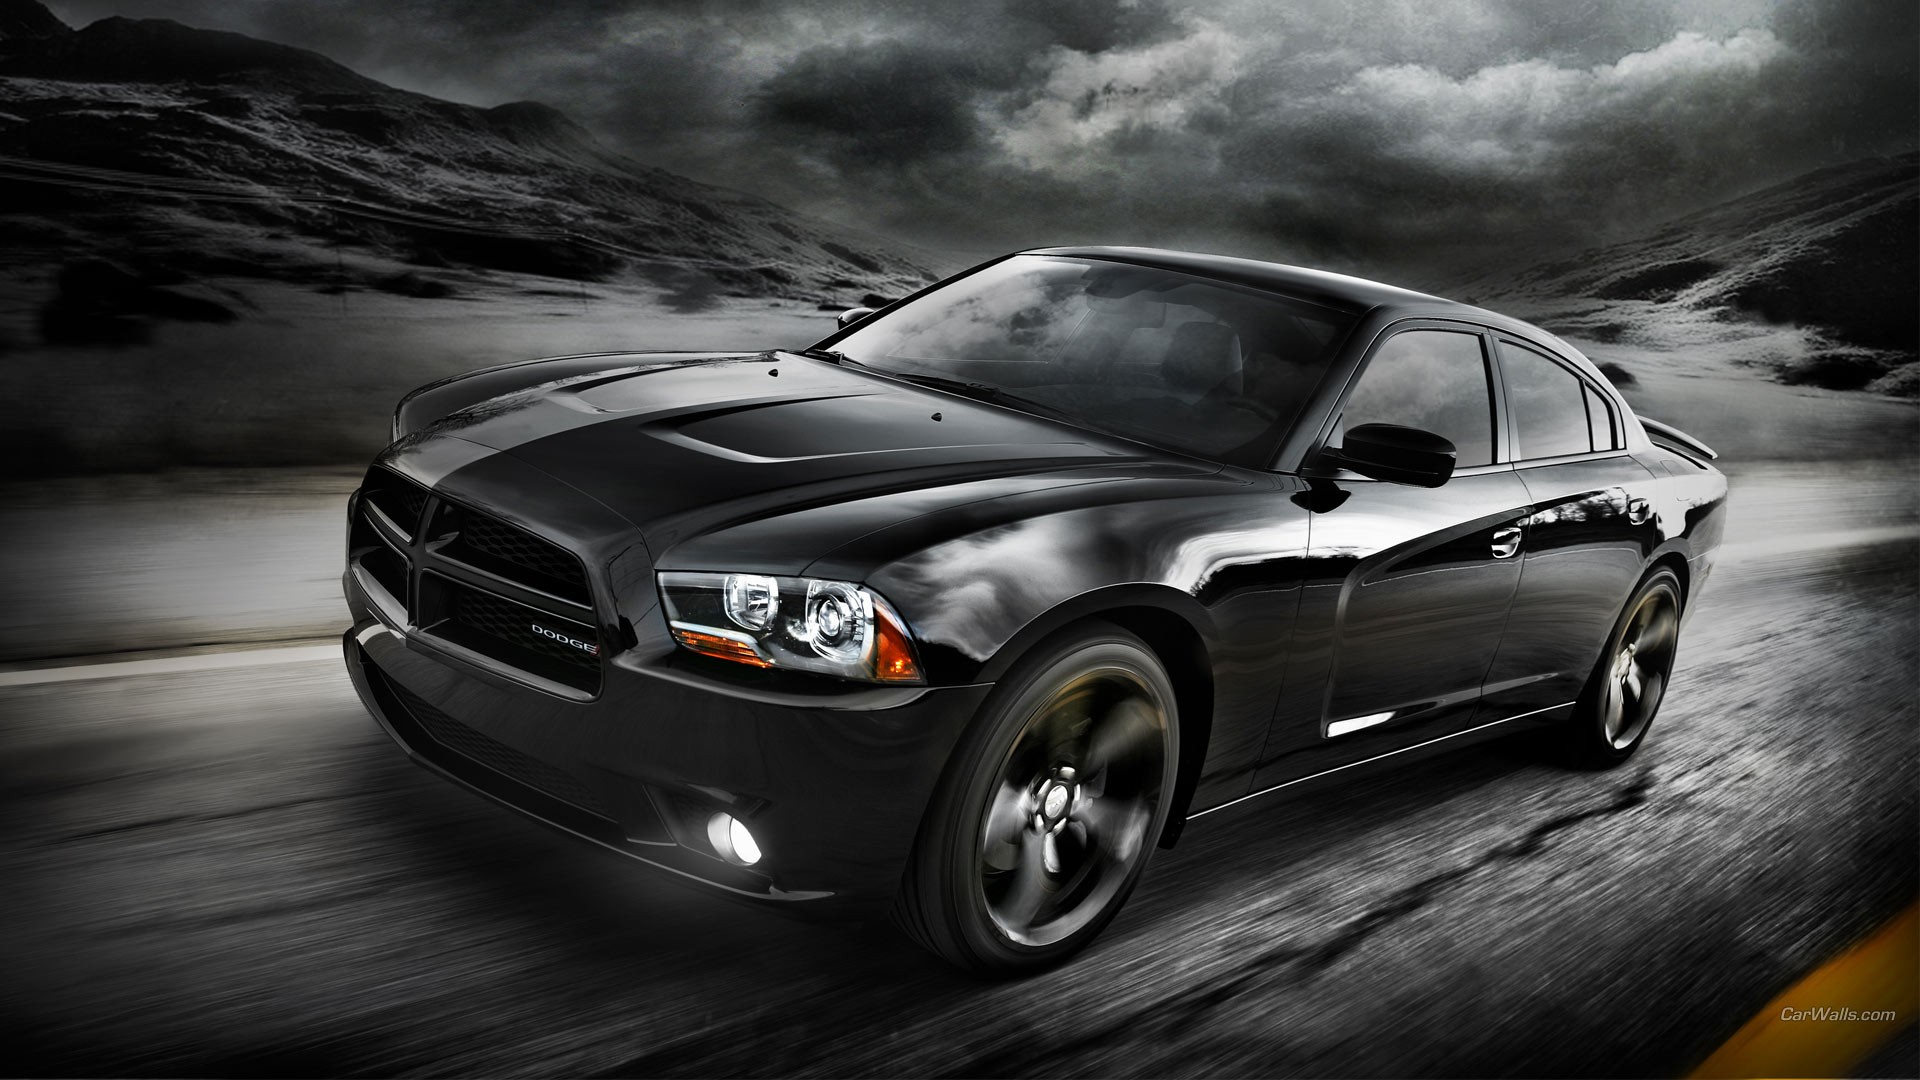 Dodge Charger, Muscle Cars, Car, Monochrome Wallpaper